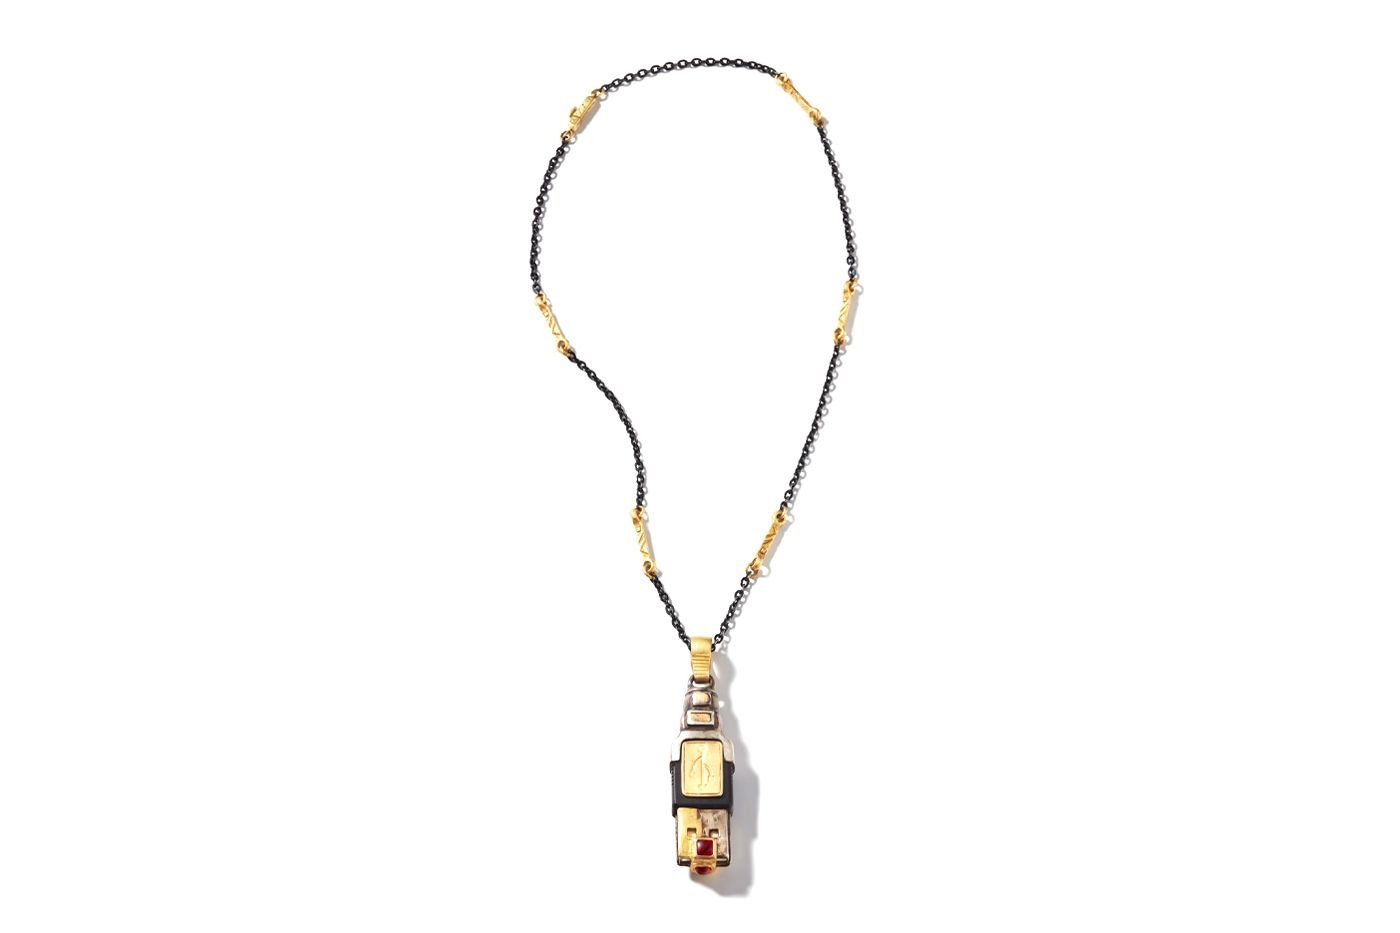 A USB dongle with is encrusted with gold and gems, to make a stunning necklace.